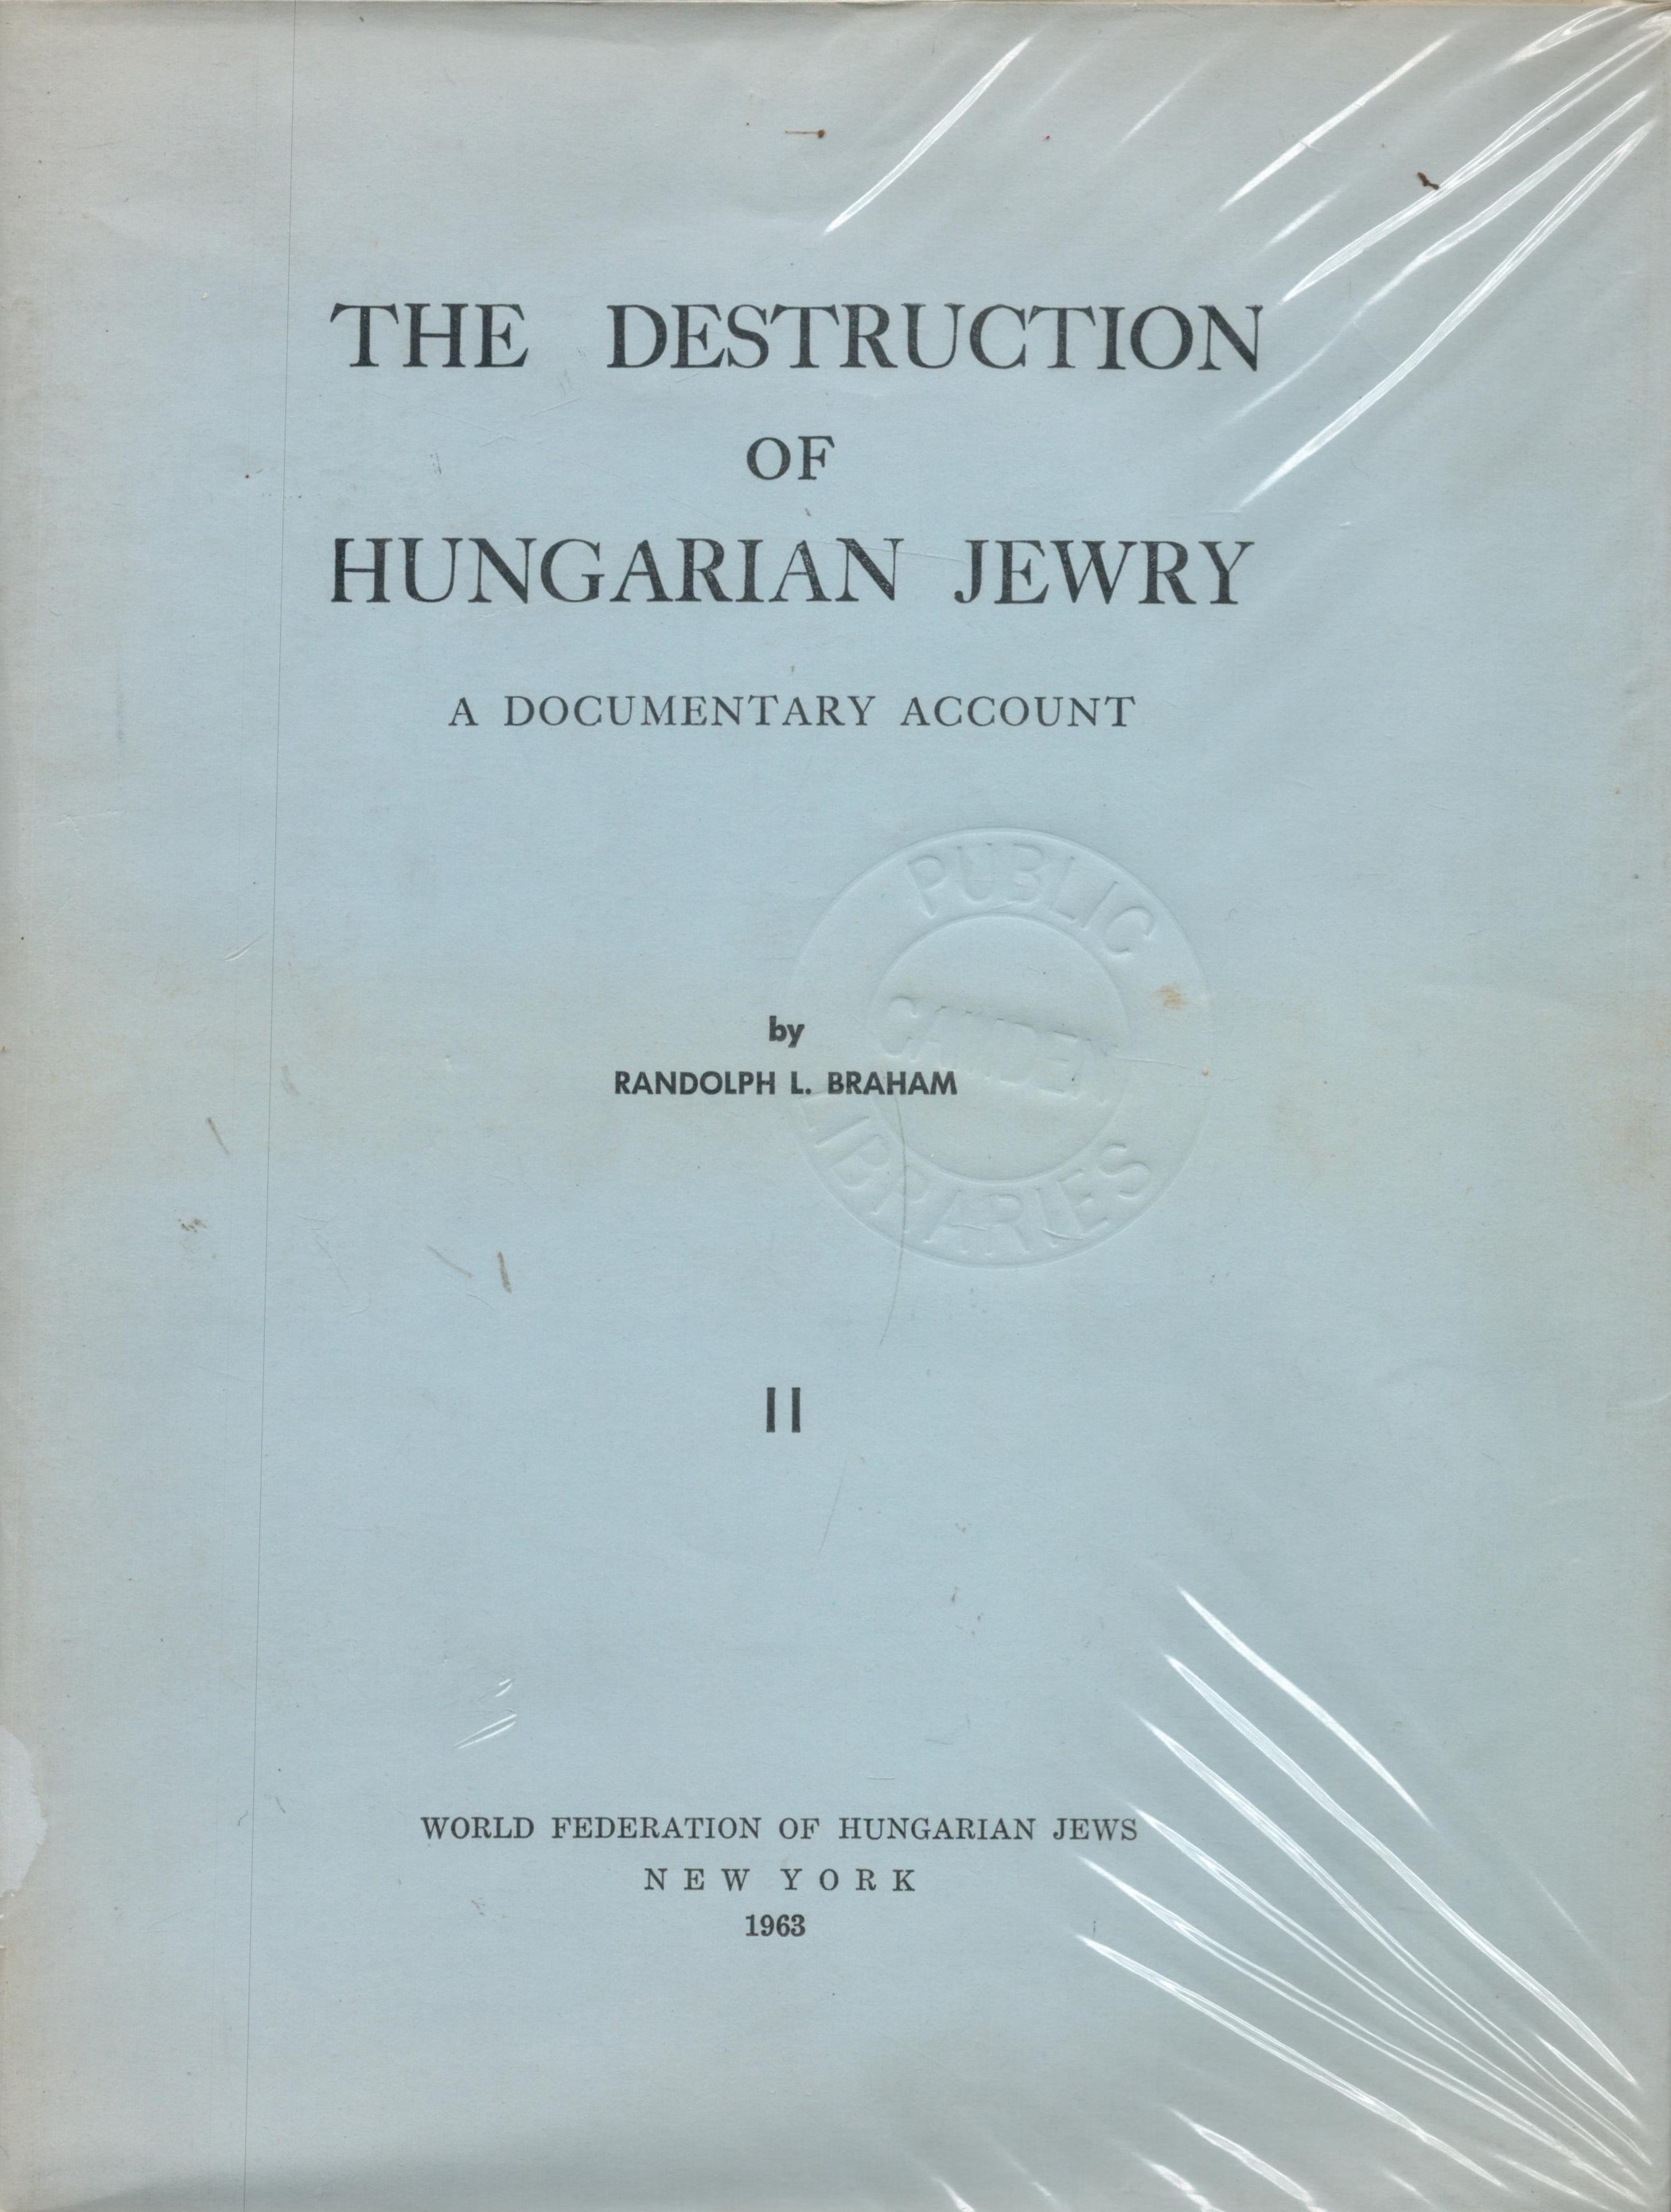 The Destruction of Hungarian Jewry A Documentary Account Book 2 by Randolph L Braham 1963 First